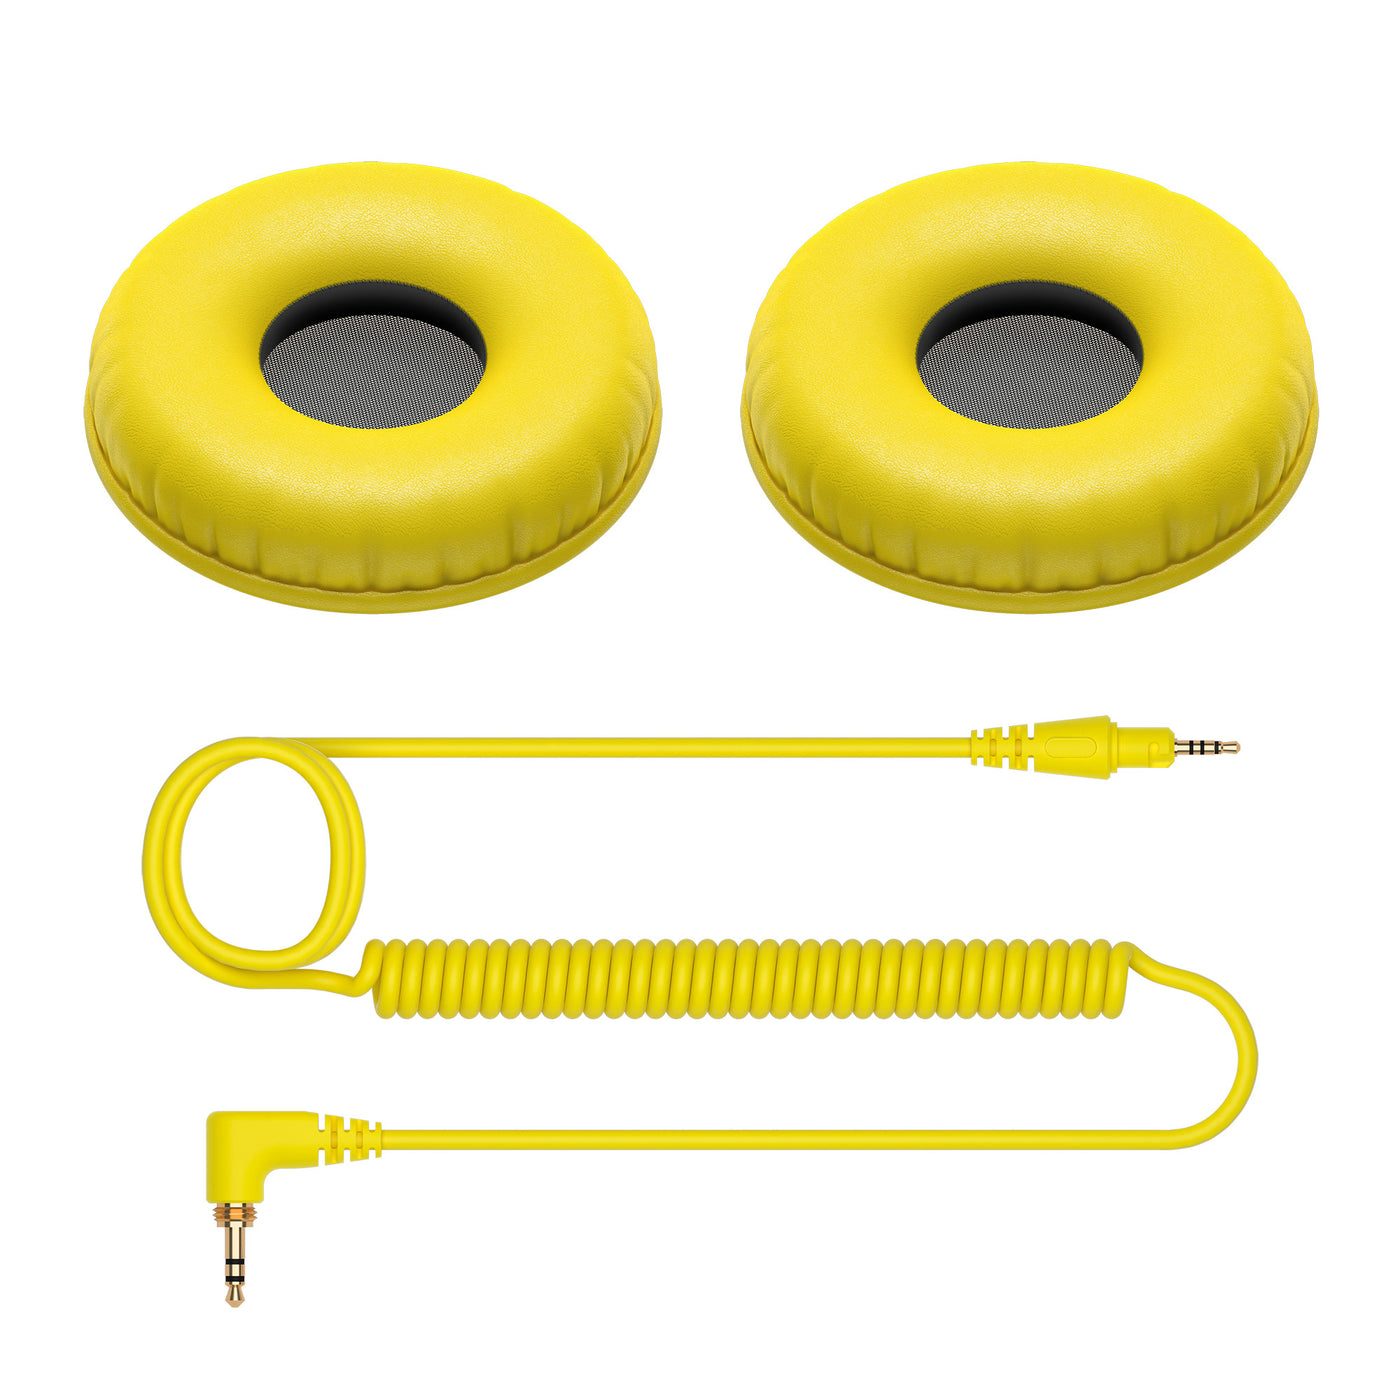 Pioneer DJ HC-CP08-Y Accessory Pack with CUE1 Series Ear Pad and Aux Cable Cord, Professional Audio Equipment, Yellow